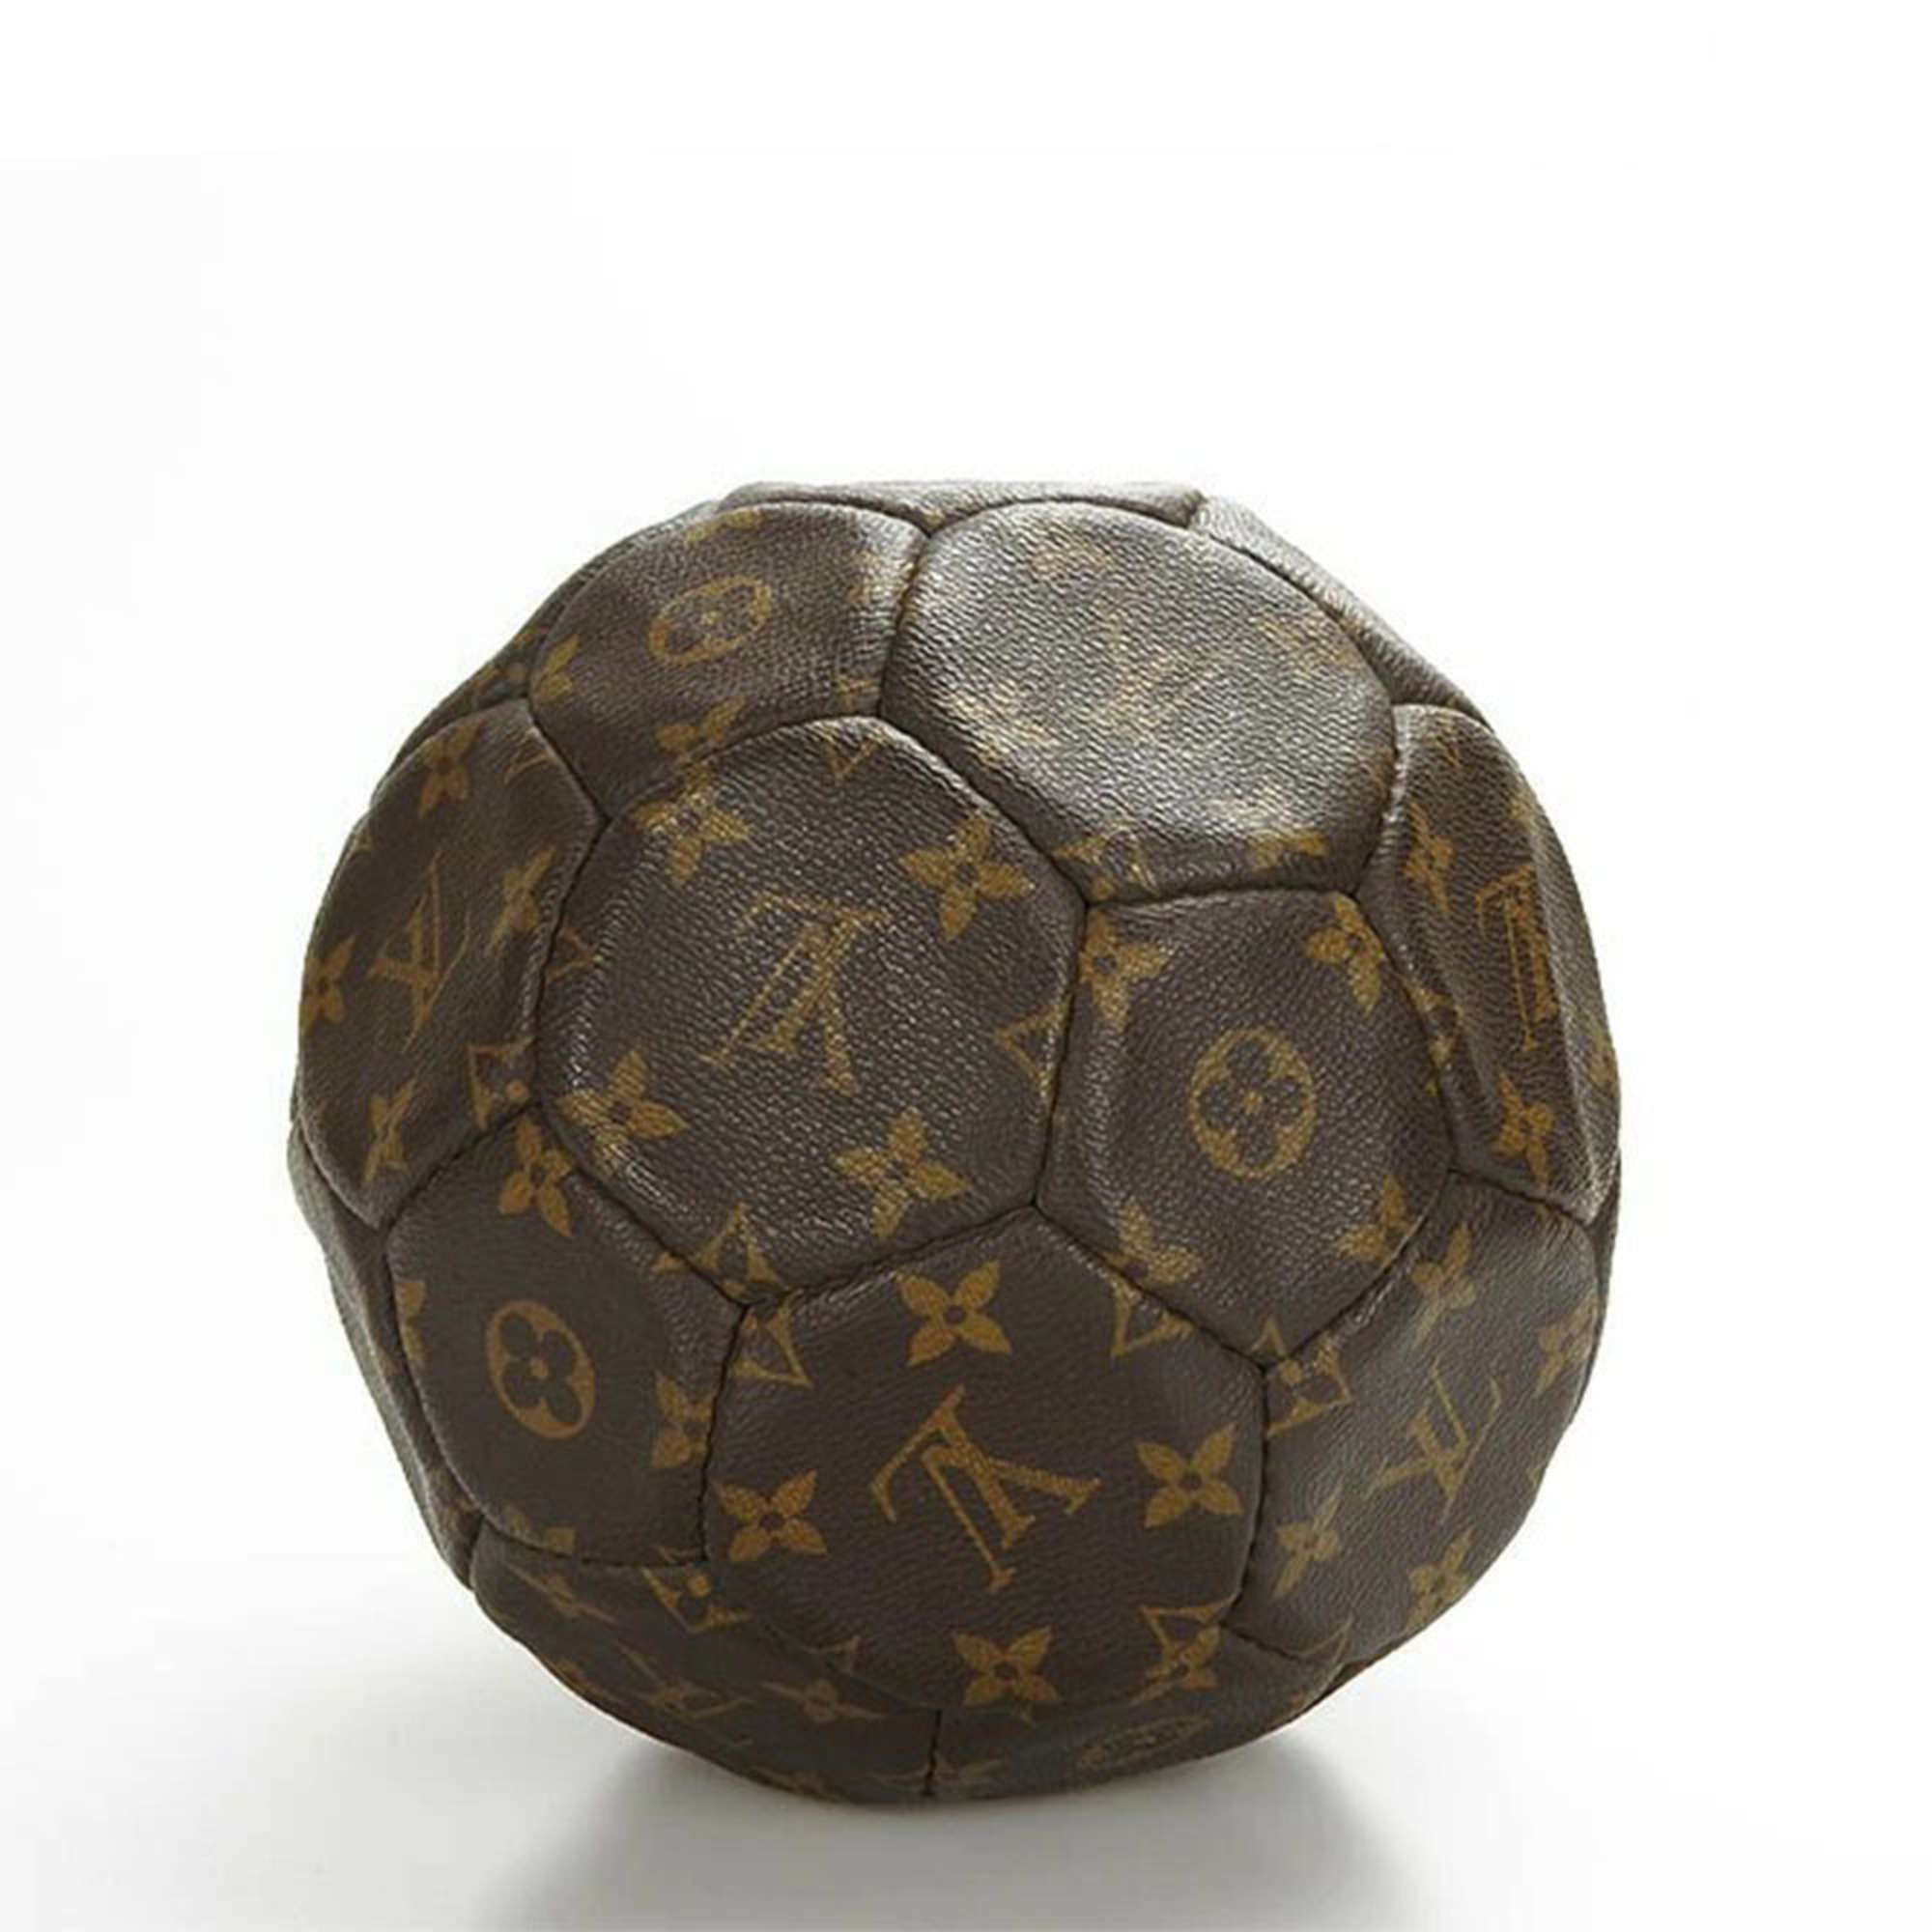 LOUIS VUITTON M99054 Soccer Ball Monogram World Cup France Tournament Limited to 3000 Collection LV Vuitton